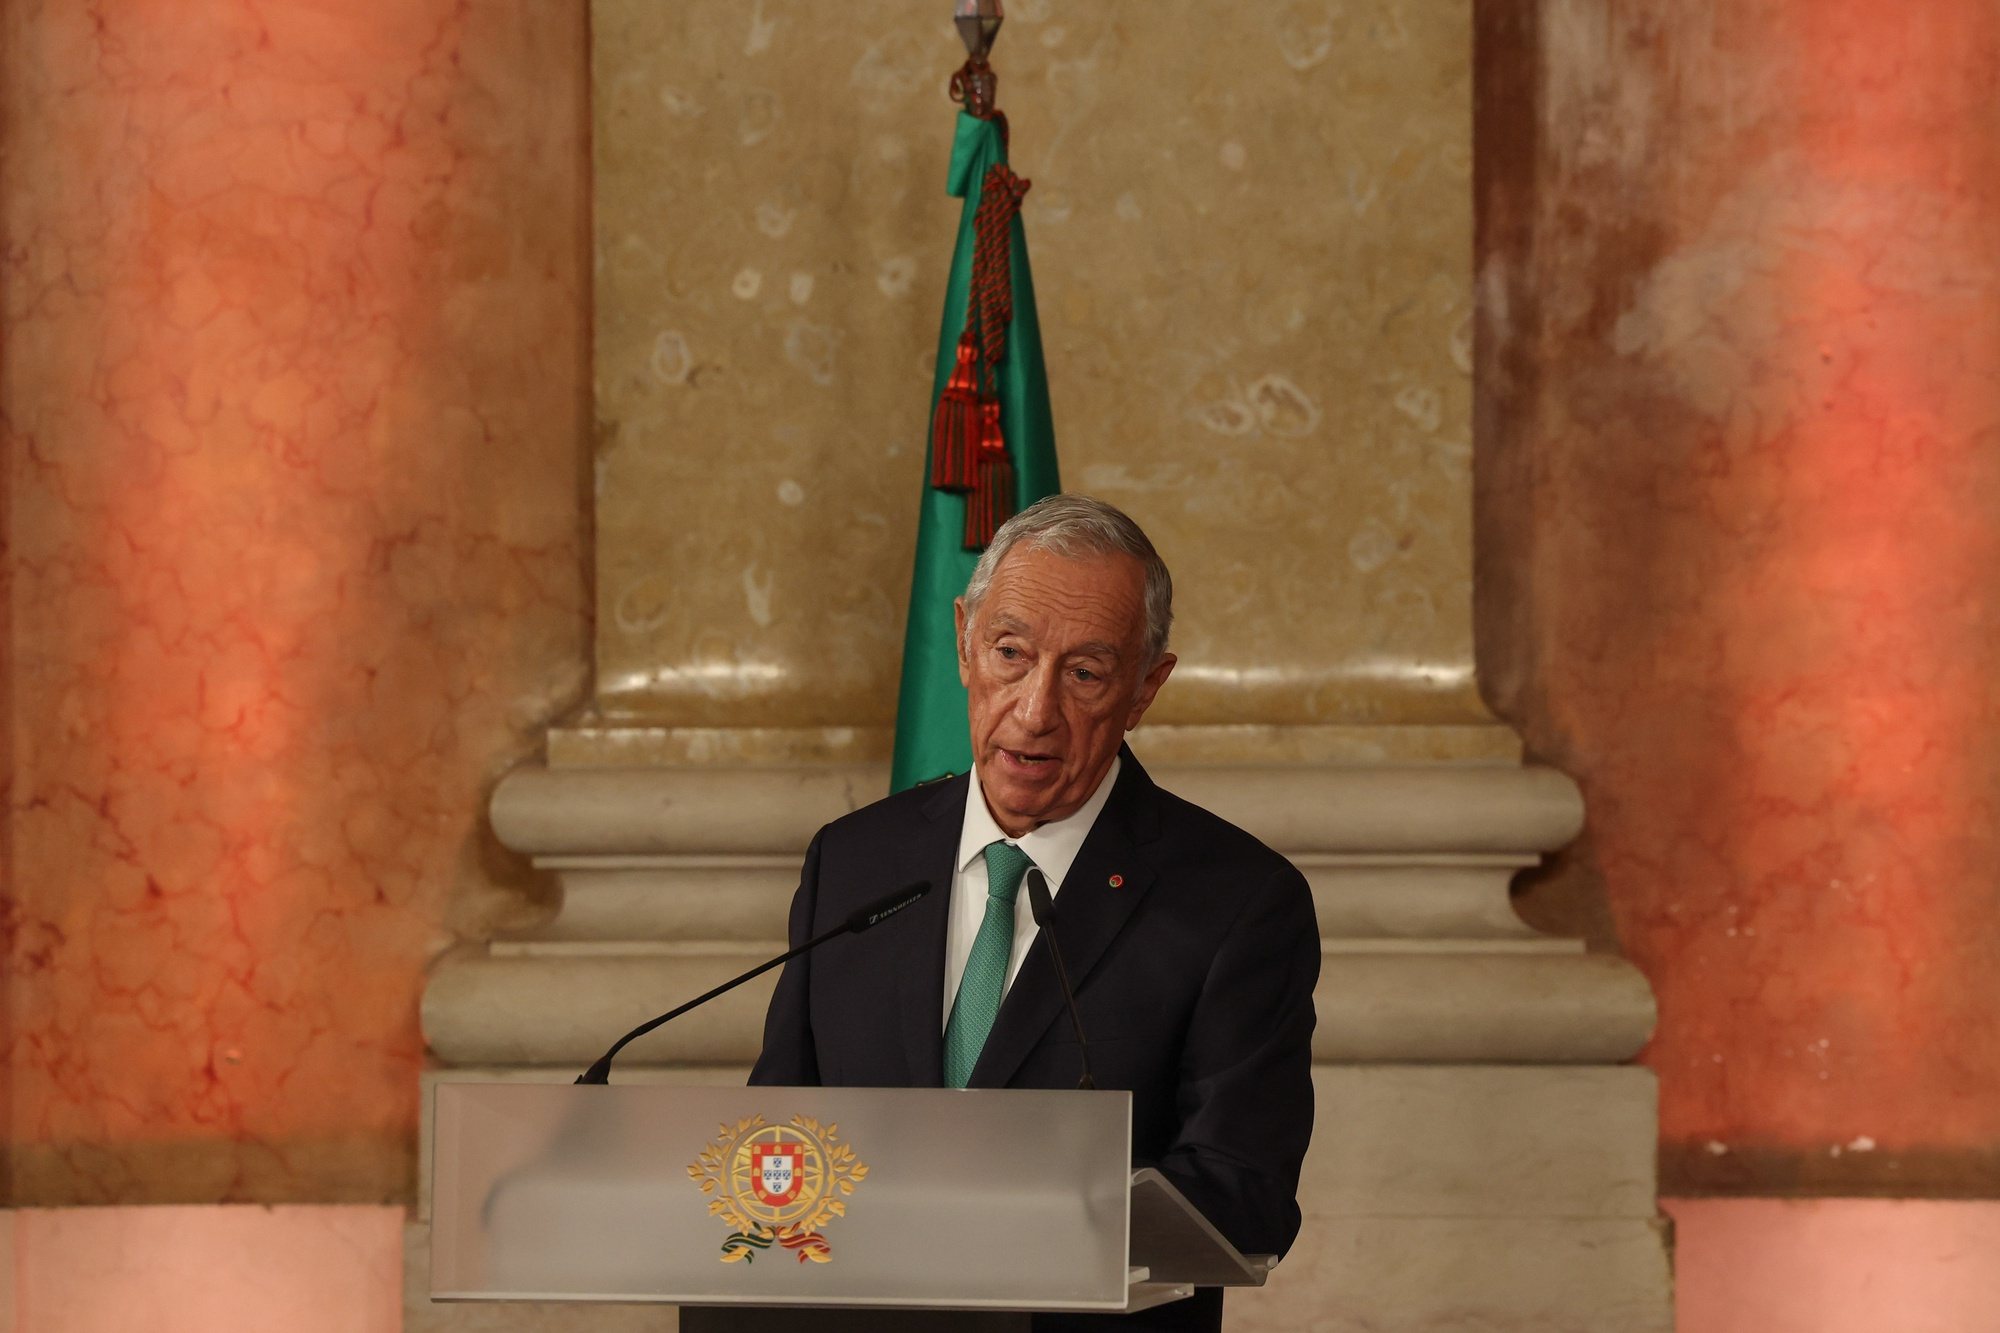 Portuguese President Marcelo Rebelo de Sousa, speaks during the swearing in cerimony of the XXIV Constitutional Government held at Ajuda Palace, in Lisbon, Portugal, 02 April March 2024. These legislative elections resulted in the victory of AD - a pre-election coalition formed by PSD, CDS-PP and People&#039;s Monarchist Party (PPM) - by around 54,000 votes (0.85%) more than the PS, the narrowest margin in the history of Portuguese democracy. The two coalitions led by the PSD (the AD on the mainland and in the Azores, and Madeira Primeiro with the PSD and CDS-PP in Madeira) - won 28.83% of the votes and 80 members of parliament (78 for the PSD and two from the CDS-PP), according to the official results. The PS was the second-most-voted party with 27.98% and 78 MPs. JOAO RELVAS/LUSA